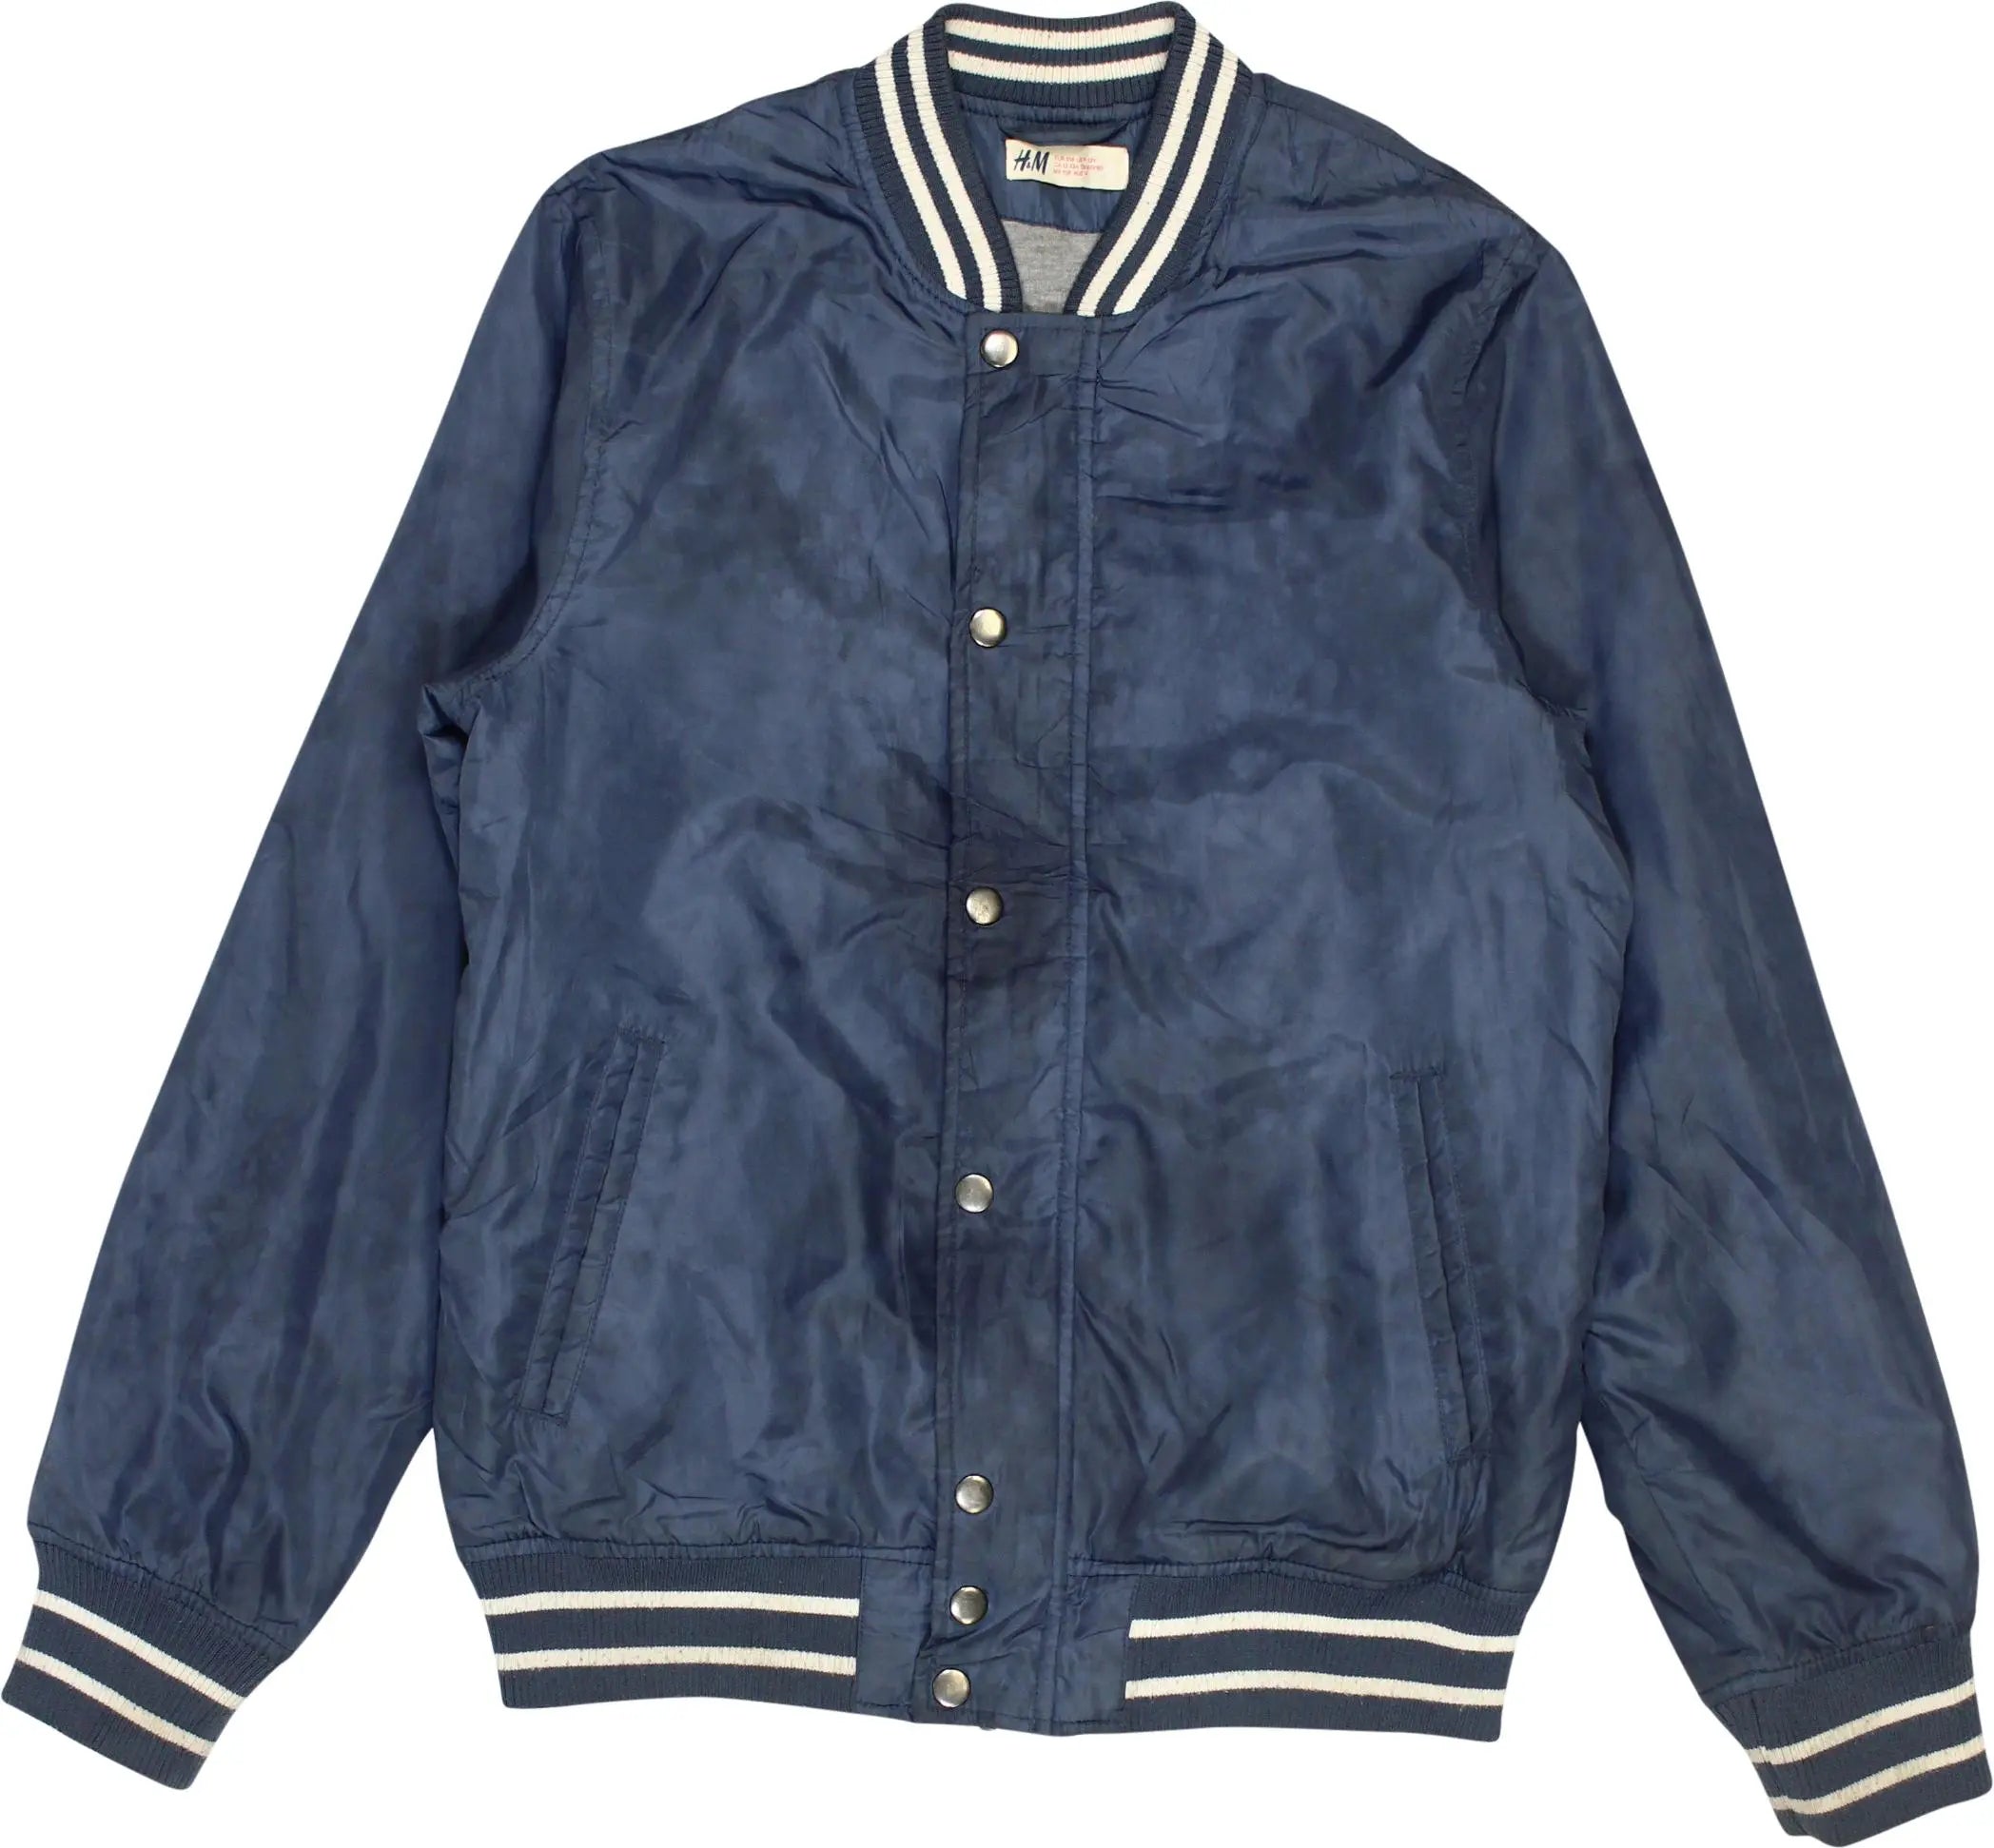 H&M - Jacket- ThriftTale.com - Vintage and second handclothing